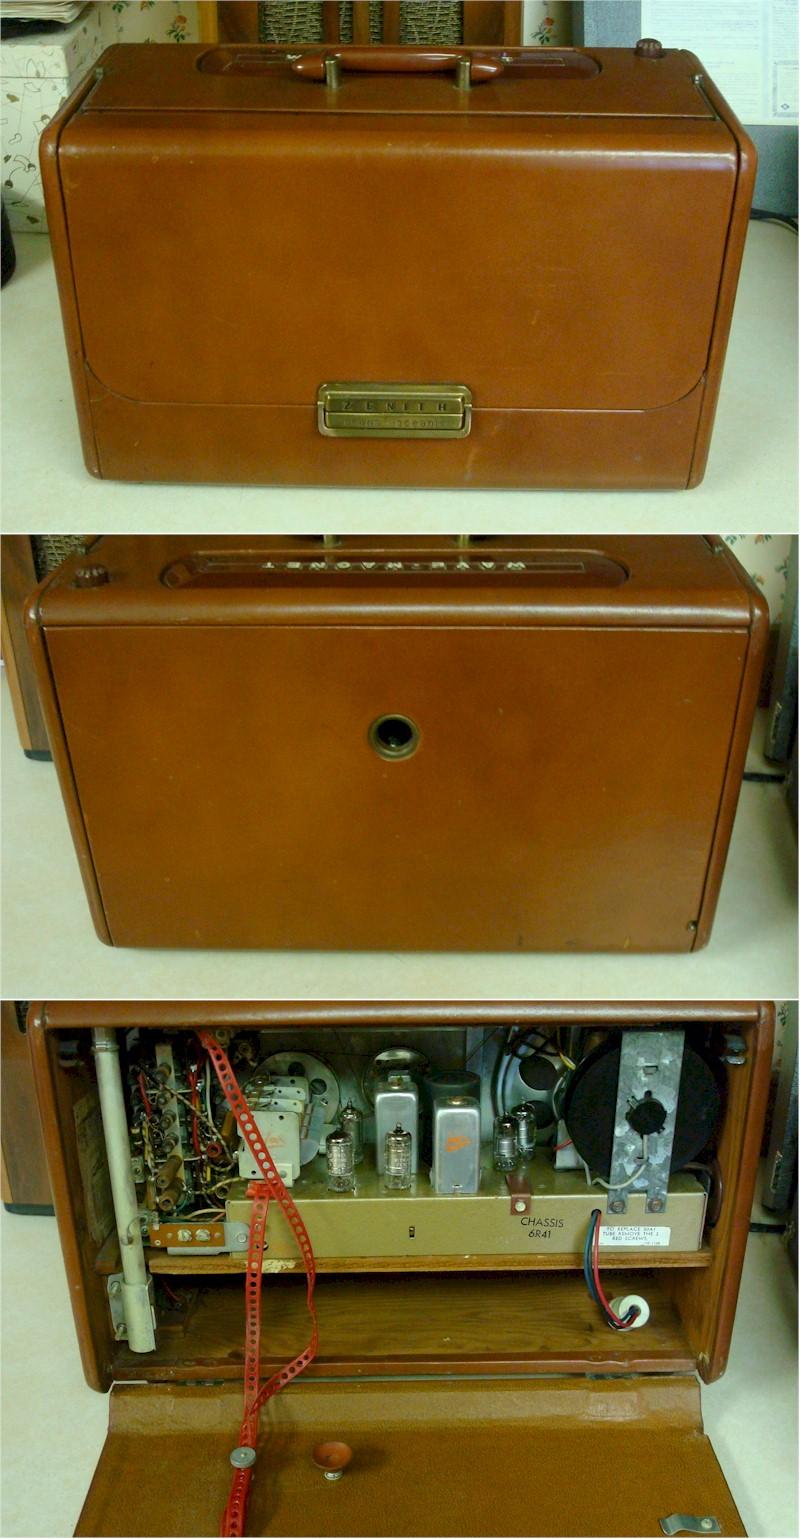 Zenith R600 (chassis 6R41 - 1954)